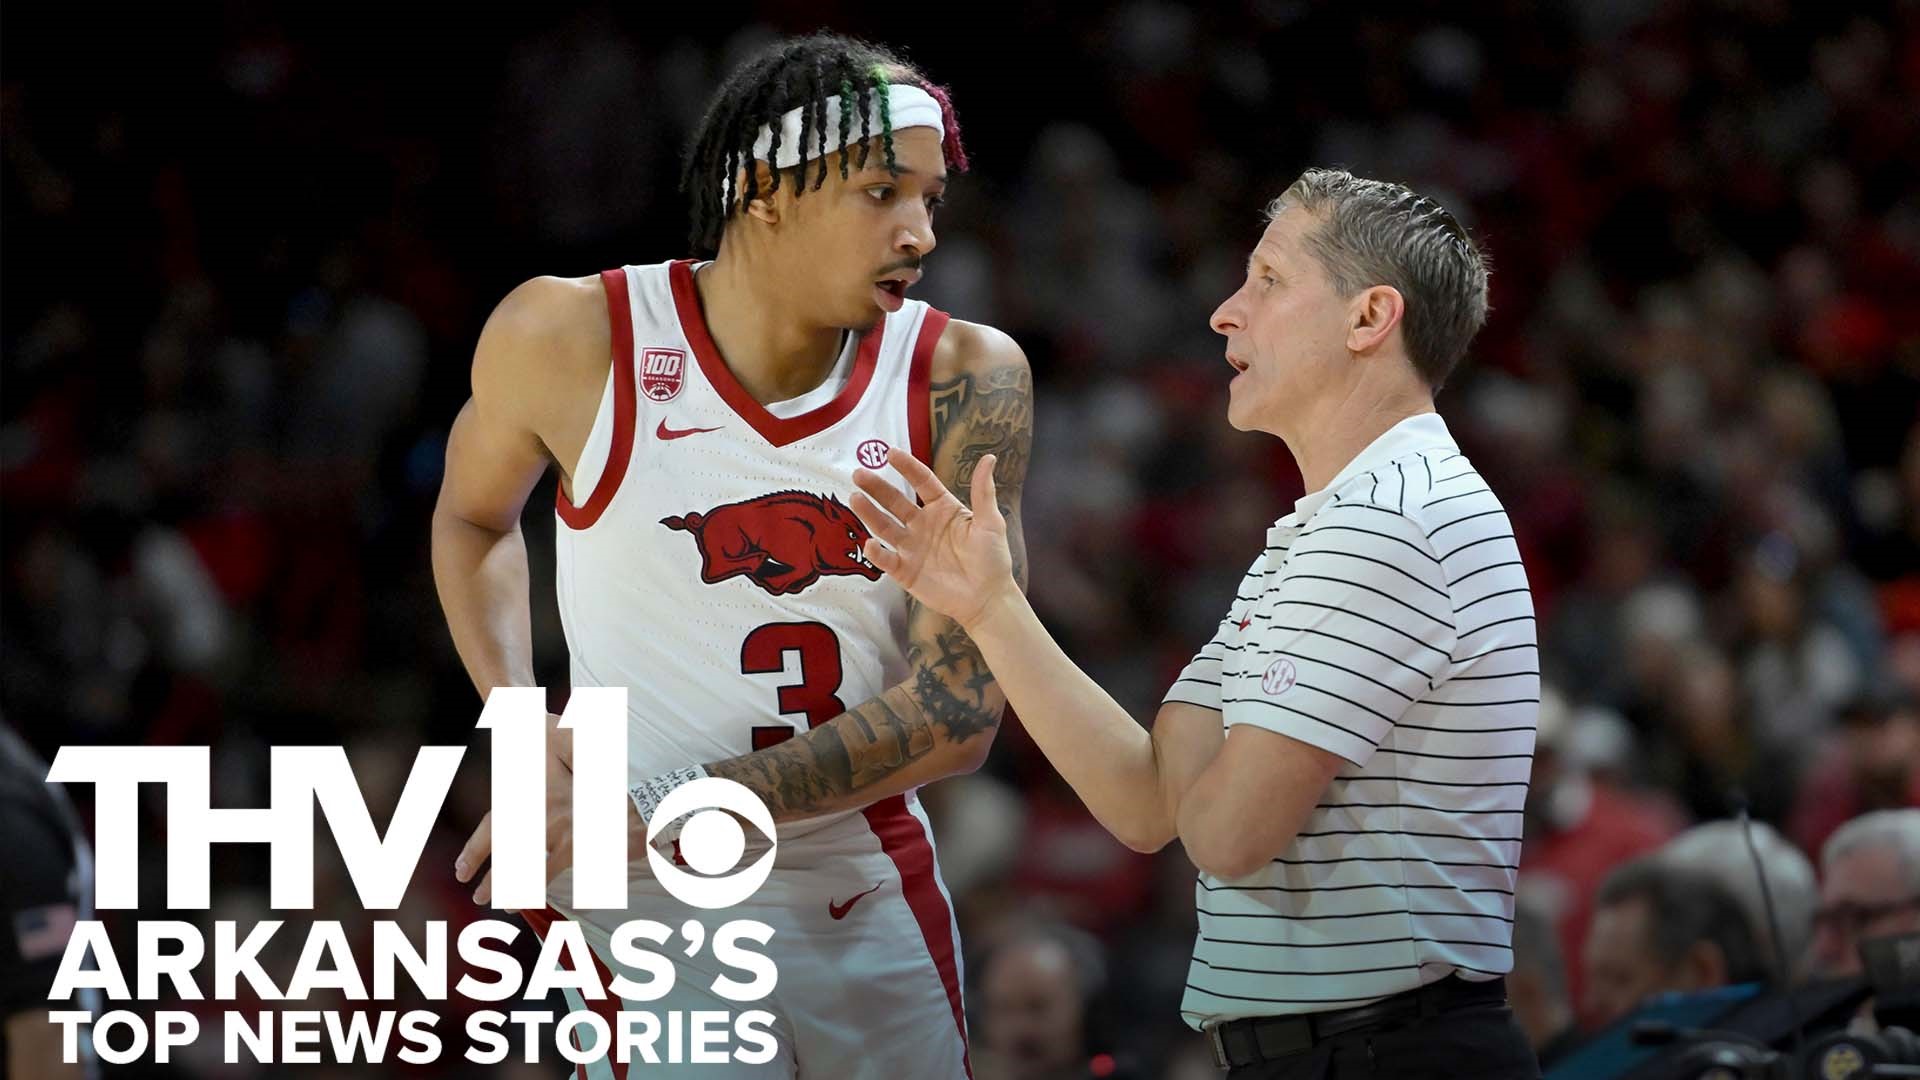 Mackailyn Johnson provides your top news stories for March 16, 2023 including the latest on the Razorbacks' first round matchup in the 2023 NCAA tournament.